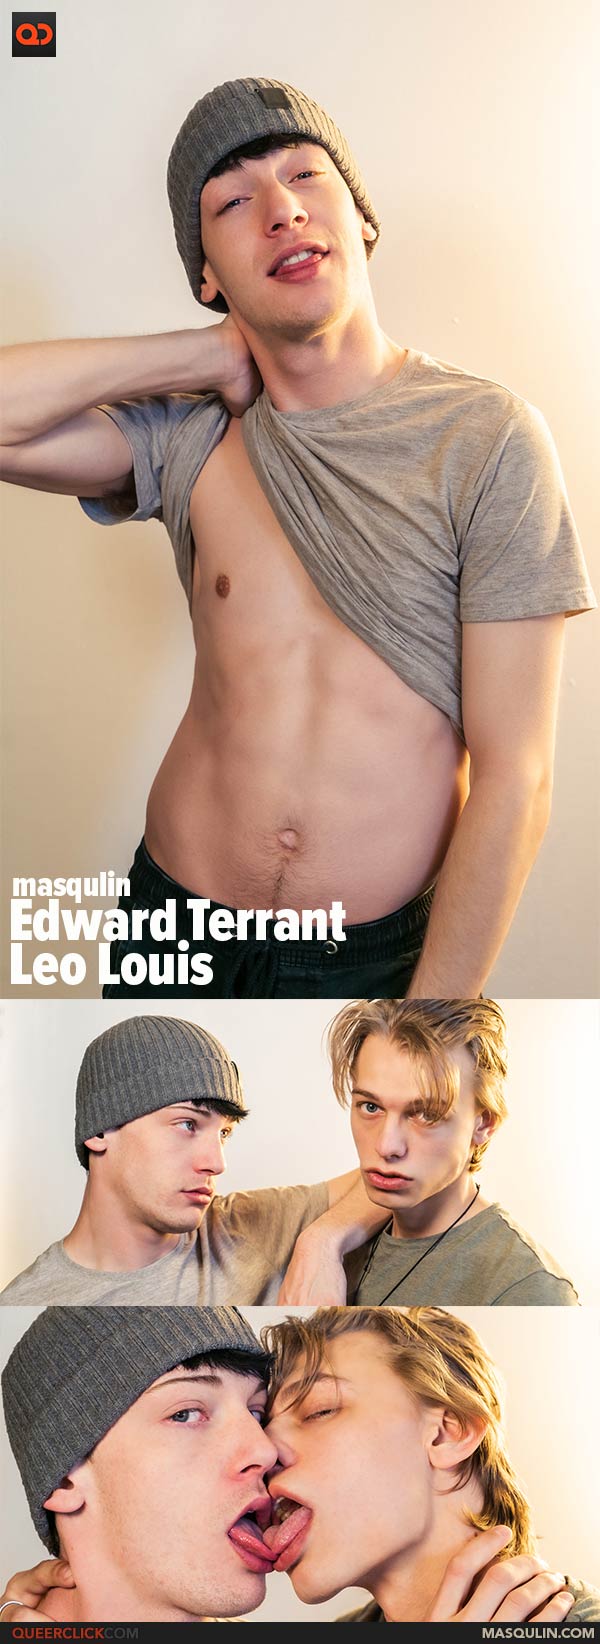 Masqulin: Edward Terrant and Leo Louis - QueerClick